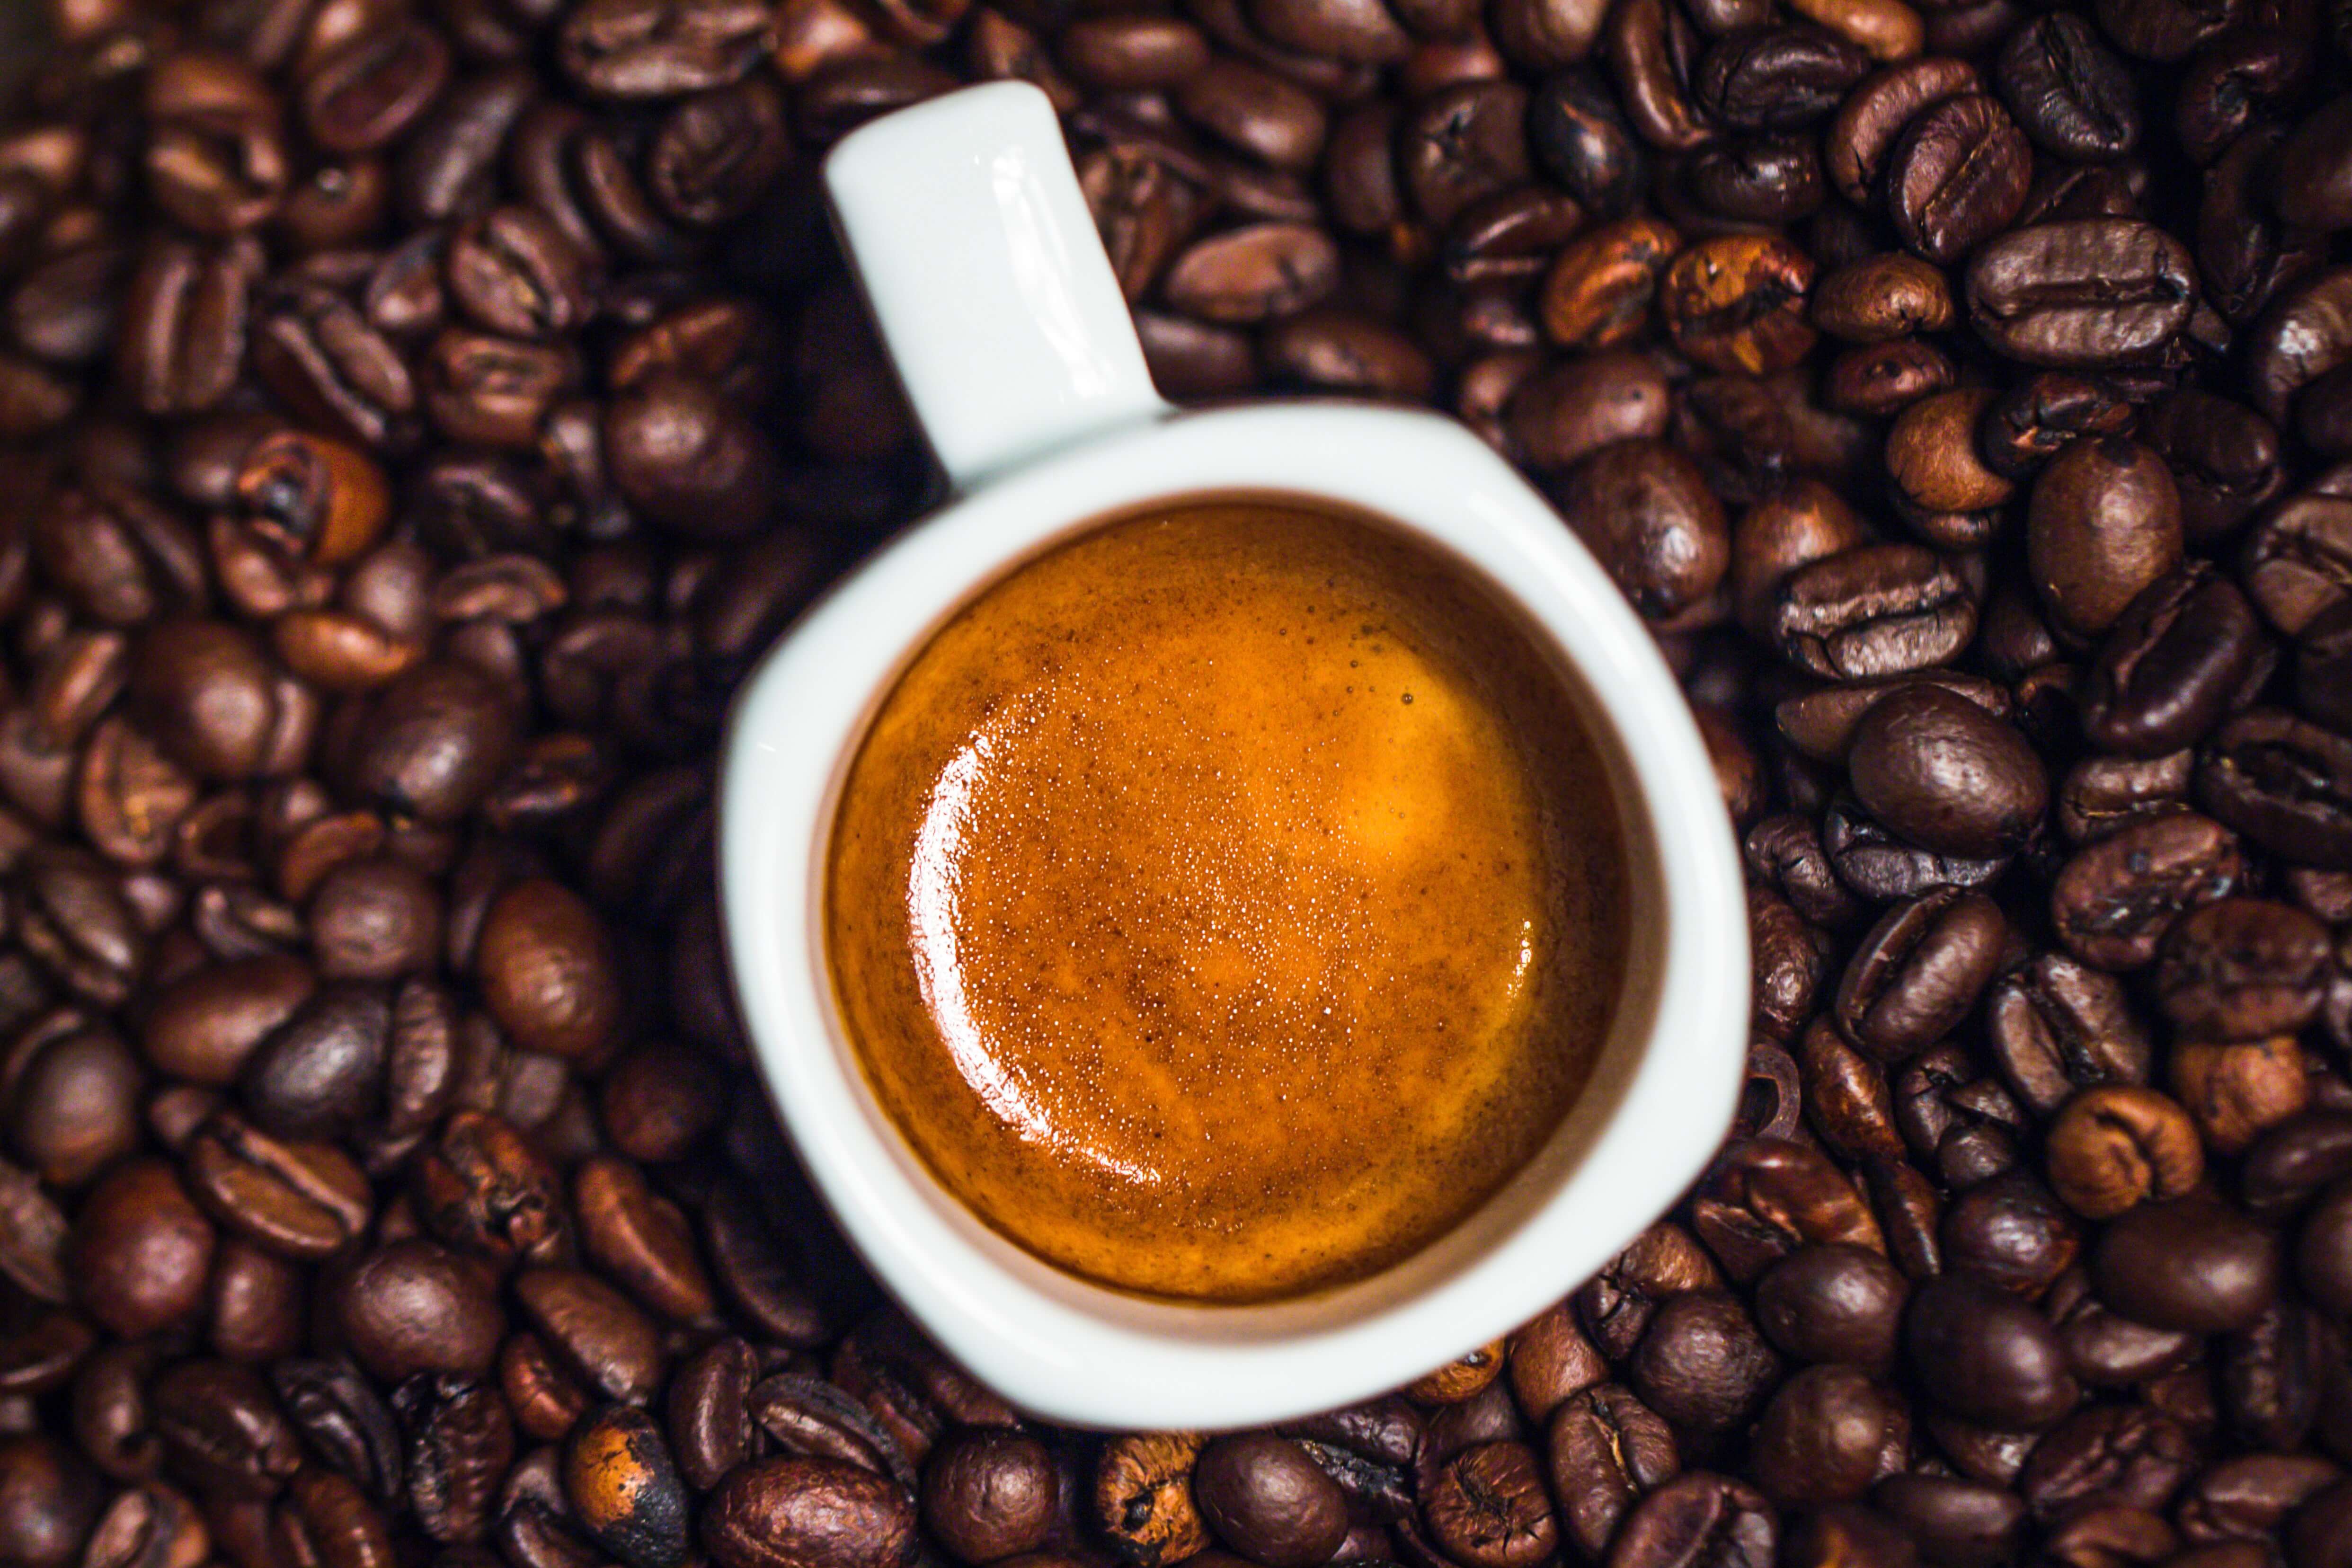 A Complete Guide To Caffeine: You Say You’re Addicted To Caffeine, But Do You Really Know What It Is?